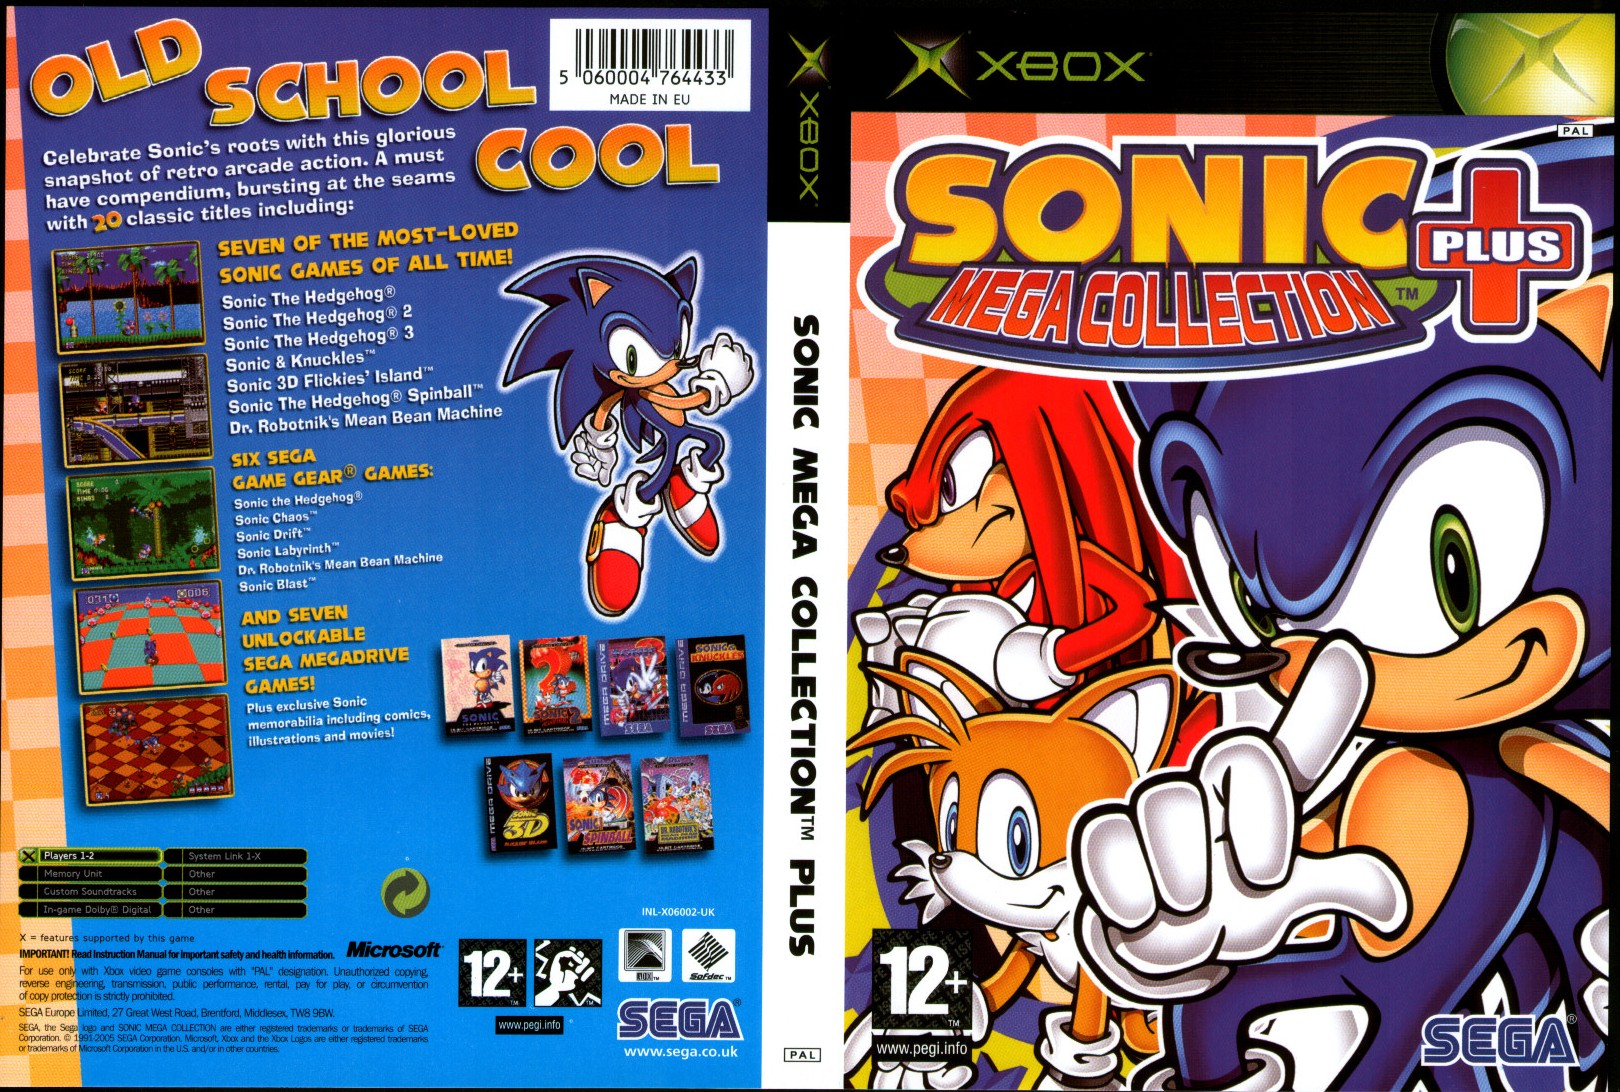 Overvloed Ananiver kanker Captain Williams =/\= | Sonic Mega Collection Plus | SEGA 2004/5 | Xbox,PC  and PS2